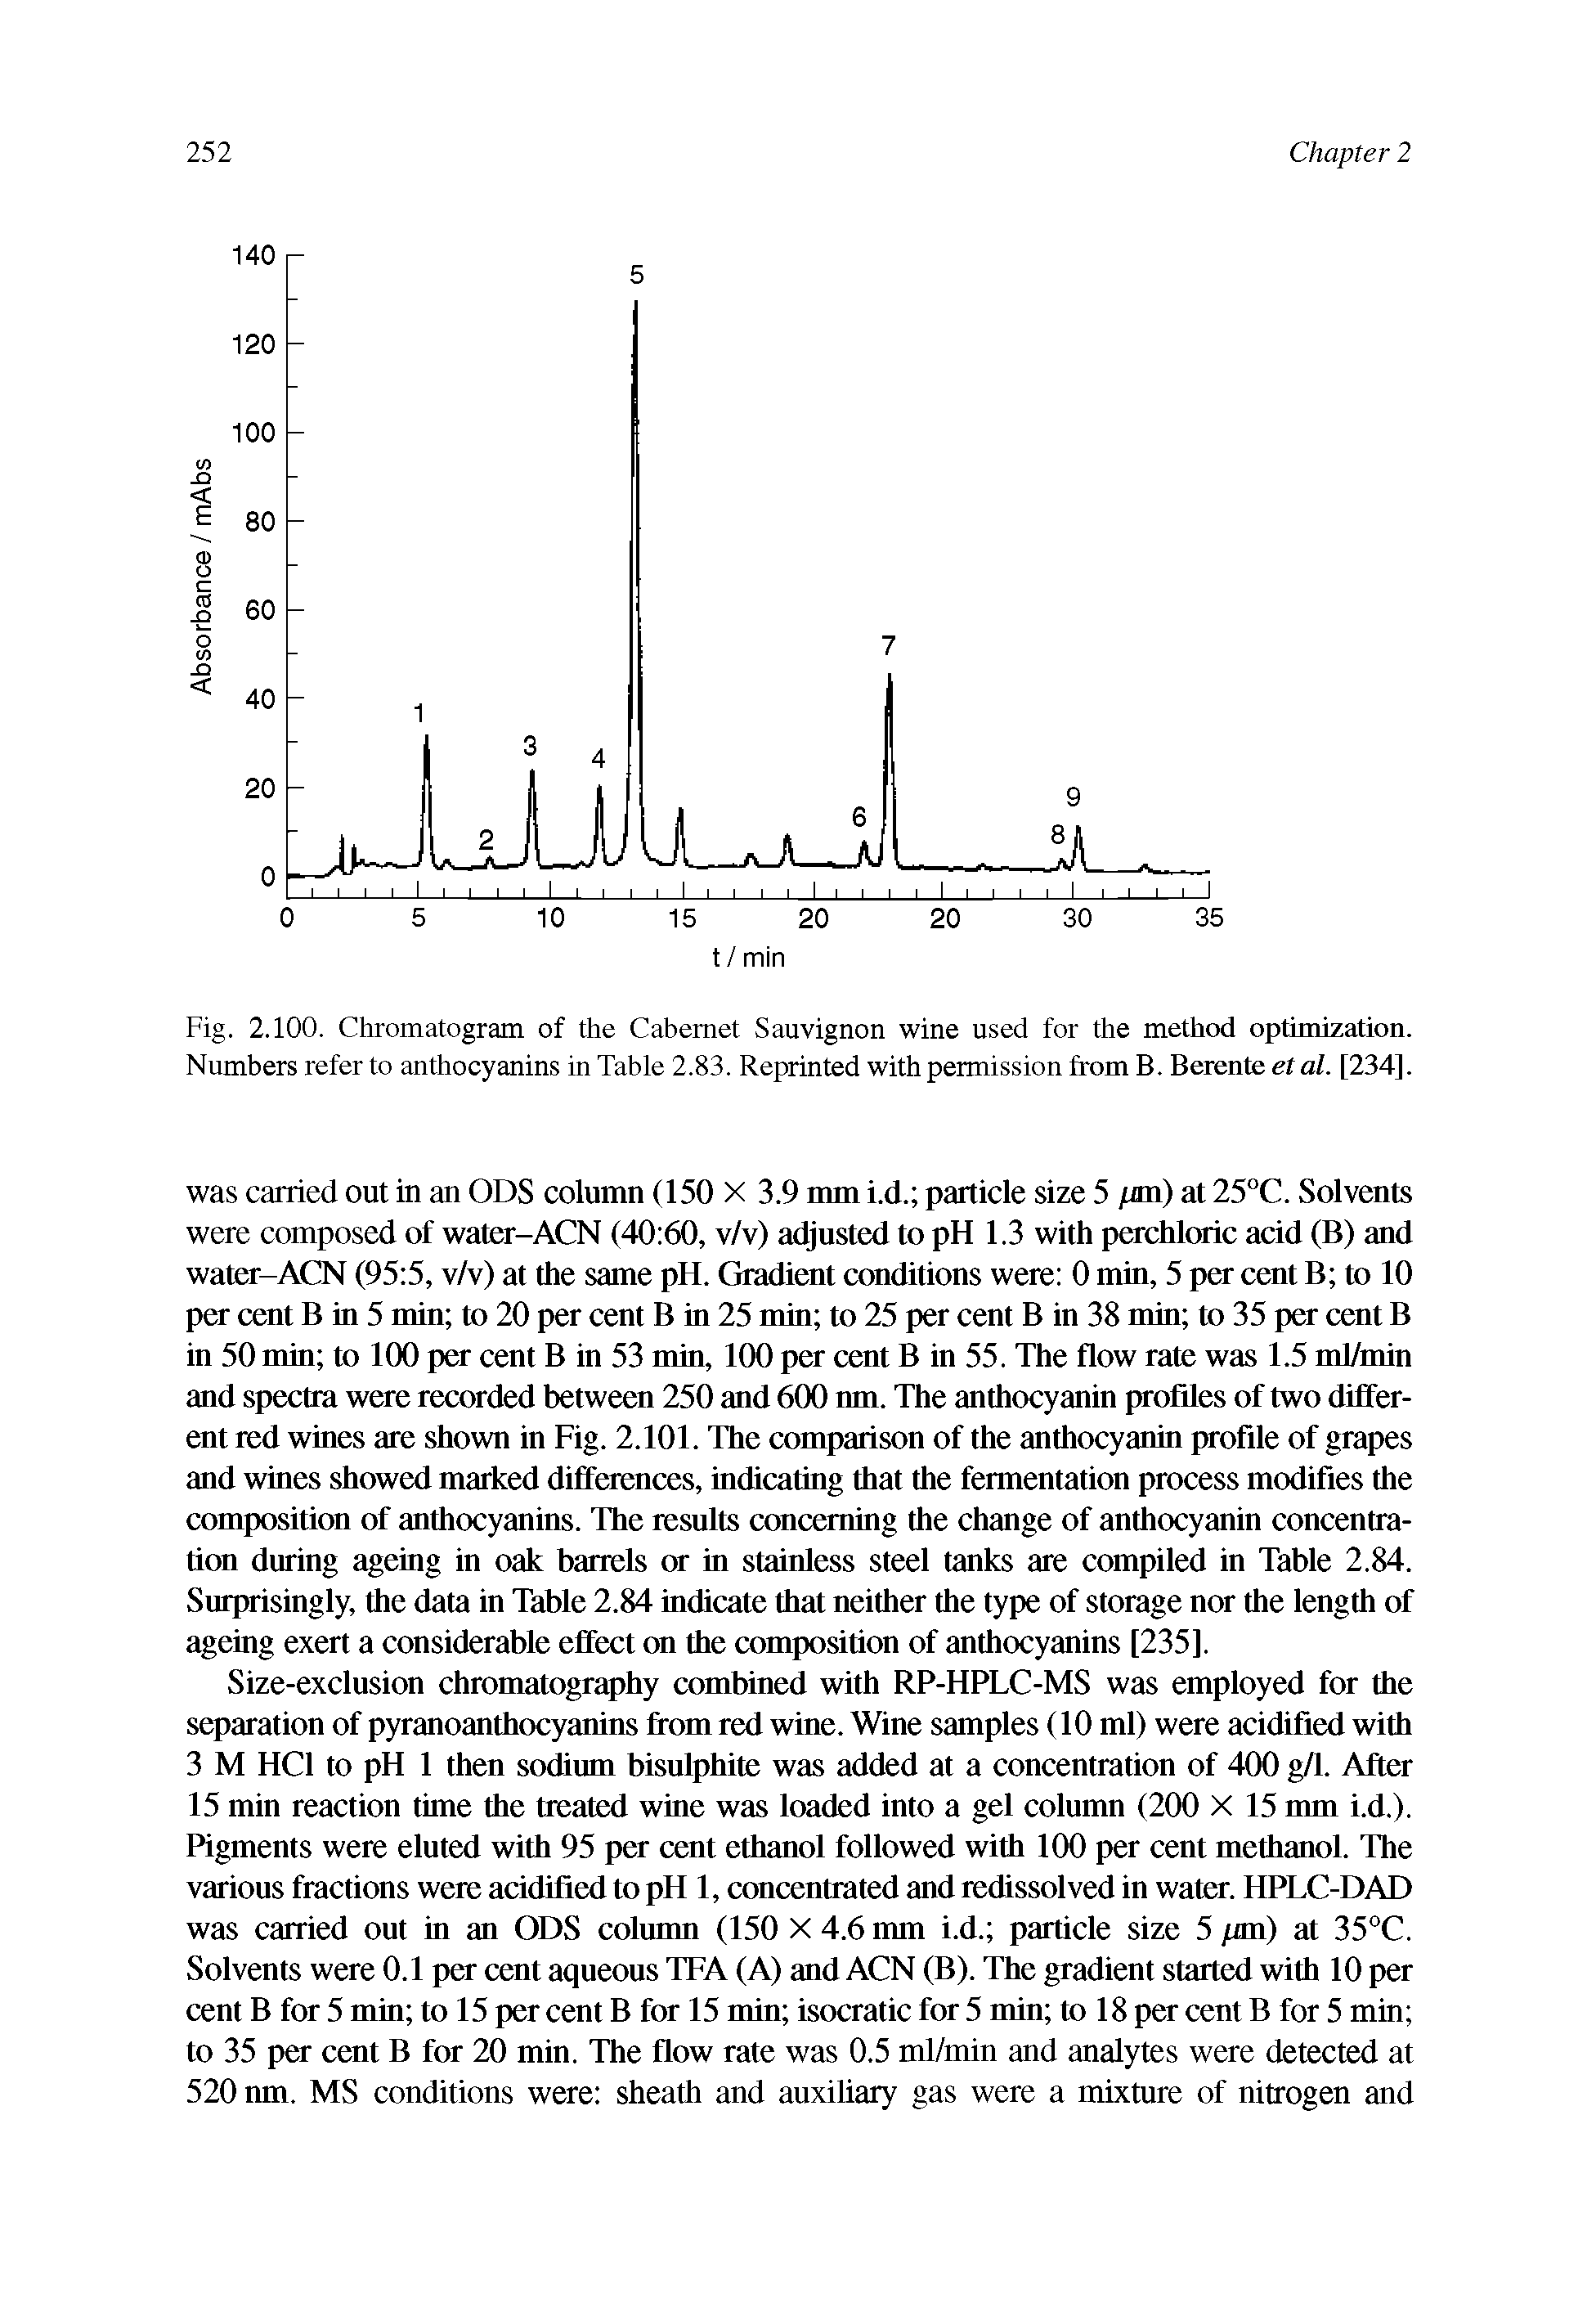 Fig. 2.100. Chromatogram of the Cabernet Sauvignon wine used for the method optimization. Numbers refer to anthocyanins in Table 2.83. Reprinted with permission from B. Berenteef al. [234].